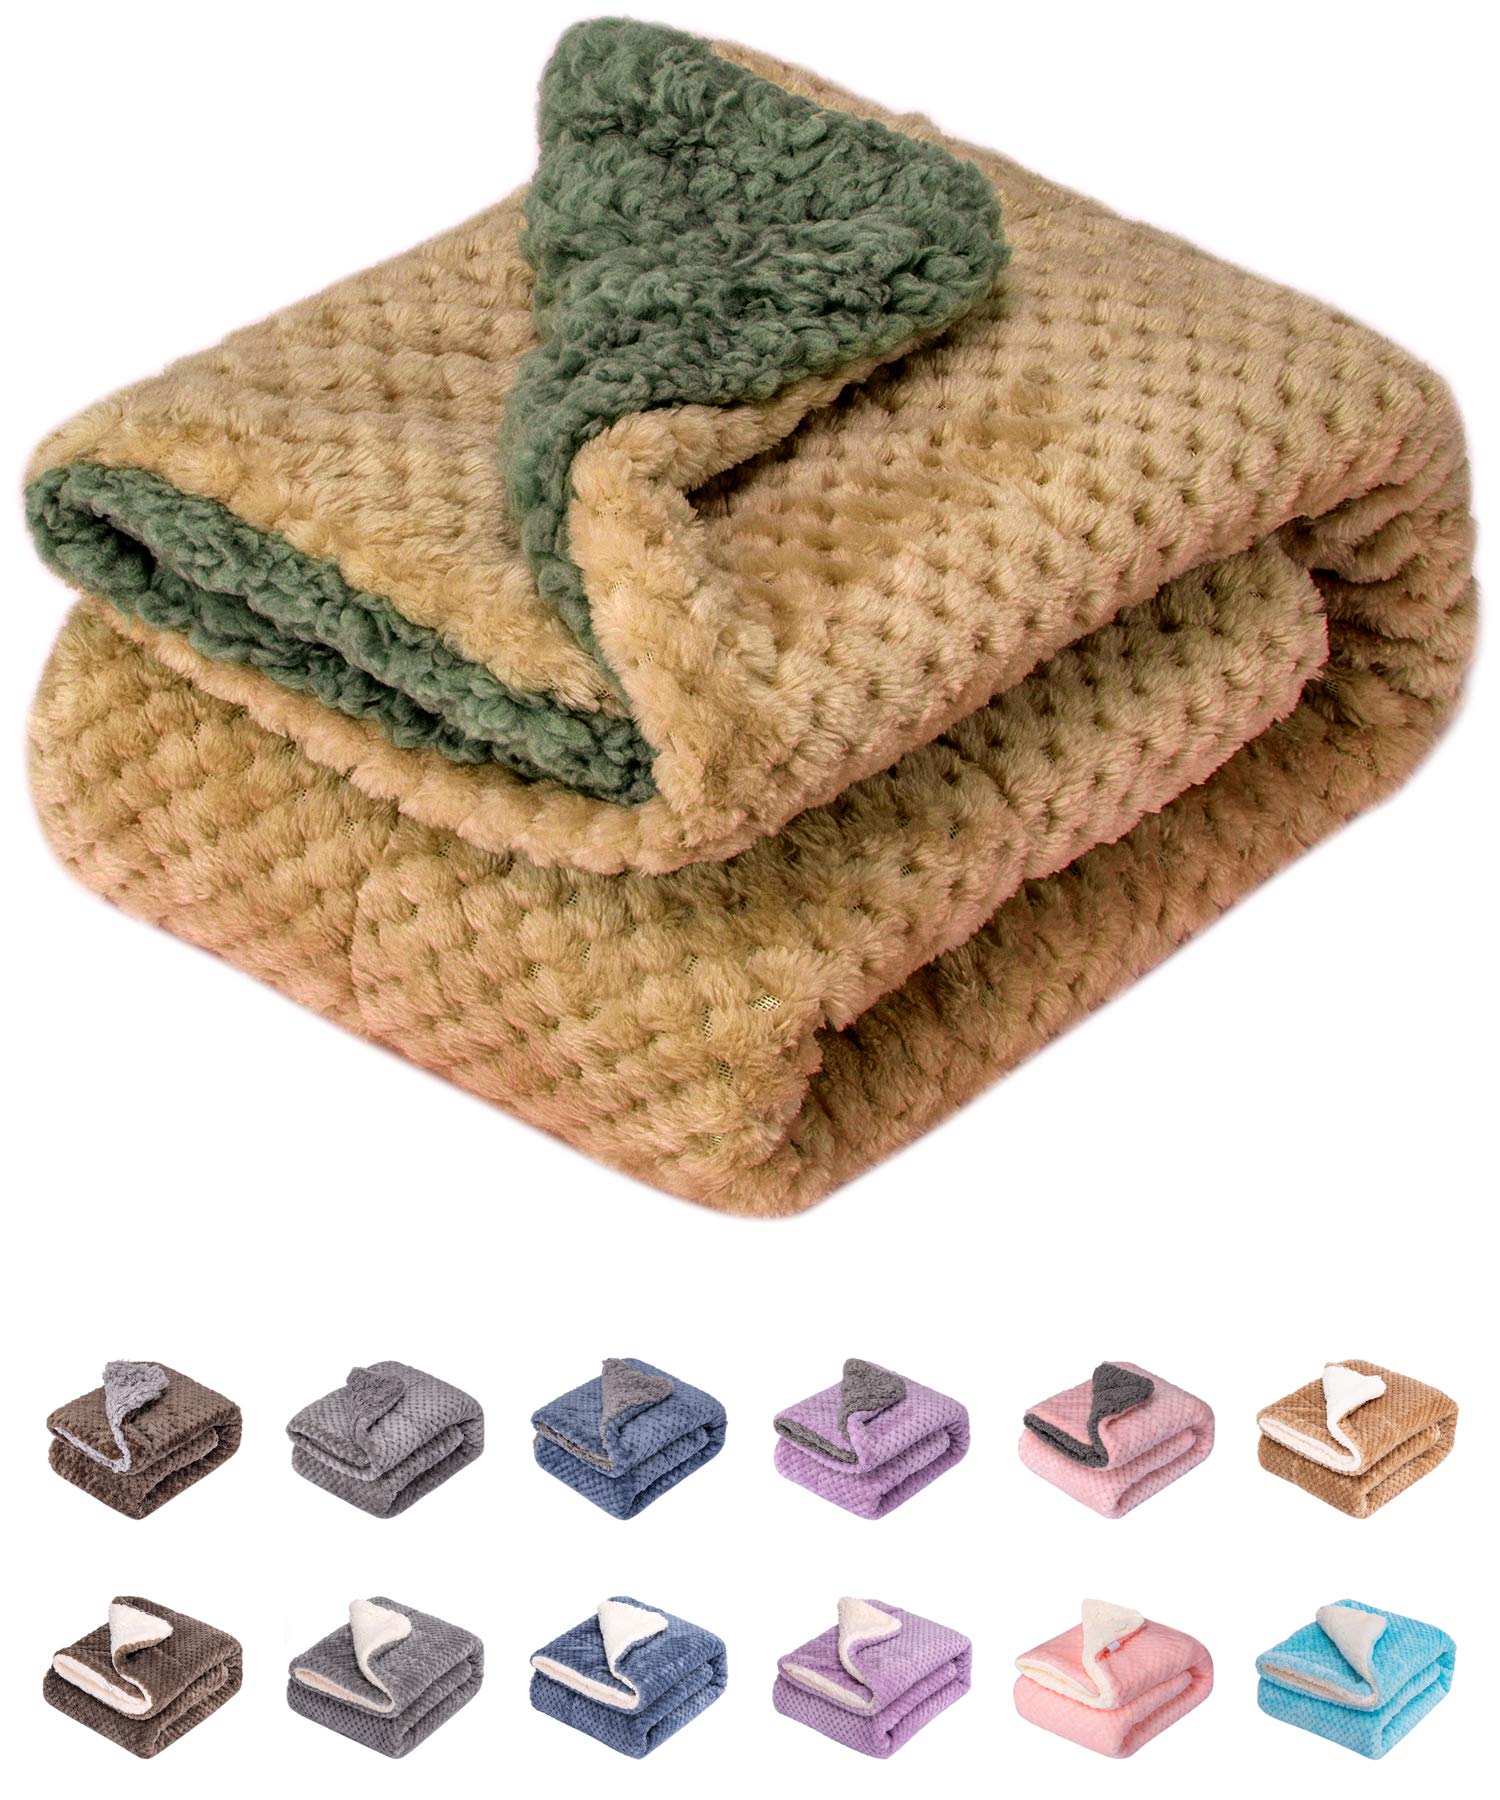 Wonder Miracle Fuzzy Dog Blanket or Cat Blanket or Pet Blanket, Warm and Soft, Plush Fleece Receiving Blankets for Dog Bed and Cat Bed, Couch, 